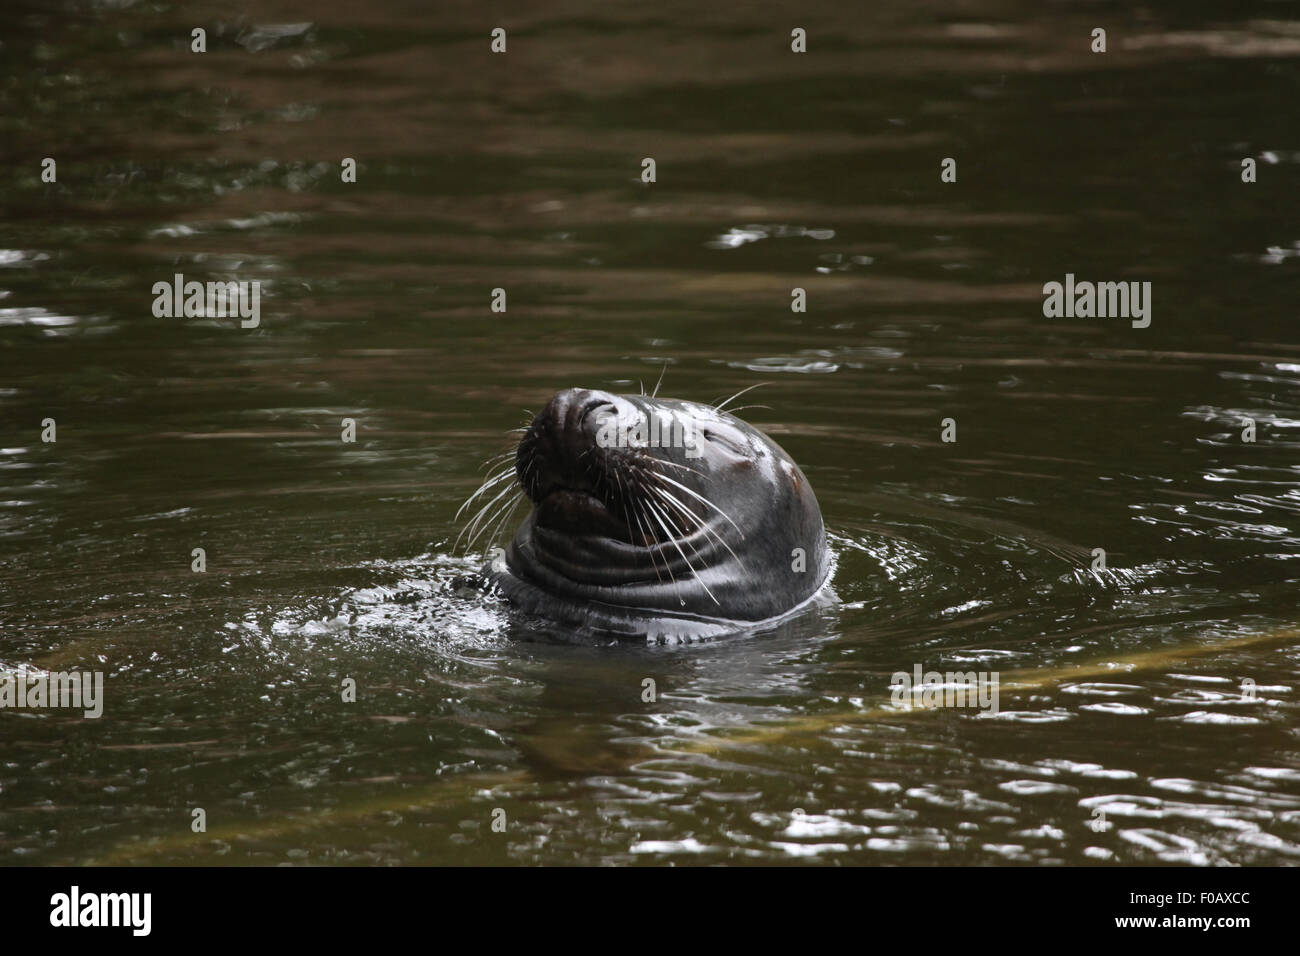 Grey seal (Halichoerus grypus), also known as the Atlantic seal at Chomutov Zoo in Chomutov, North Bohemia, Czech Republic. Stock Photo